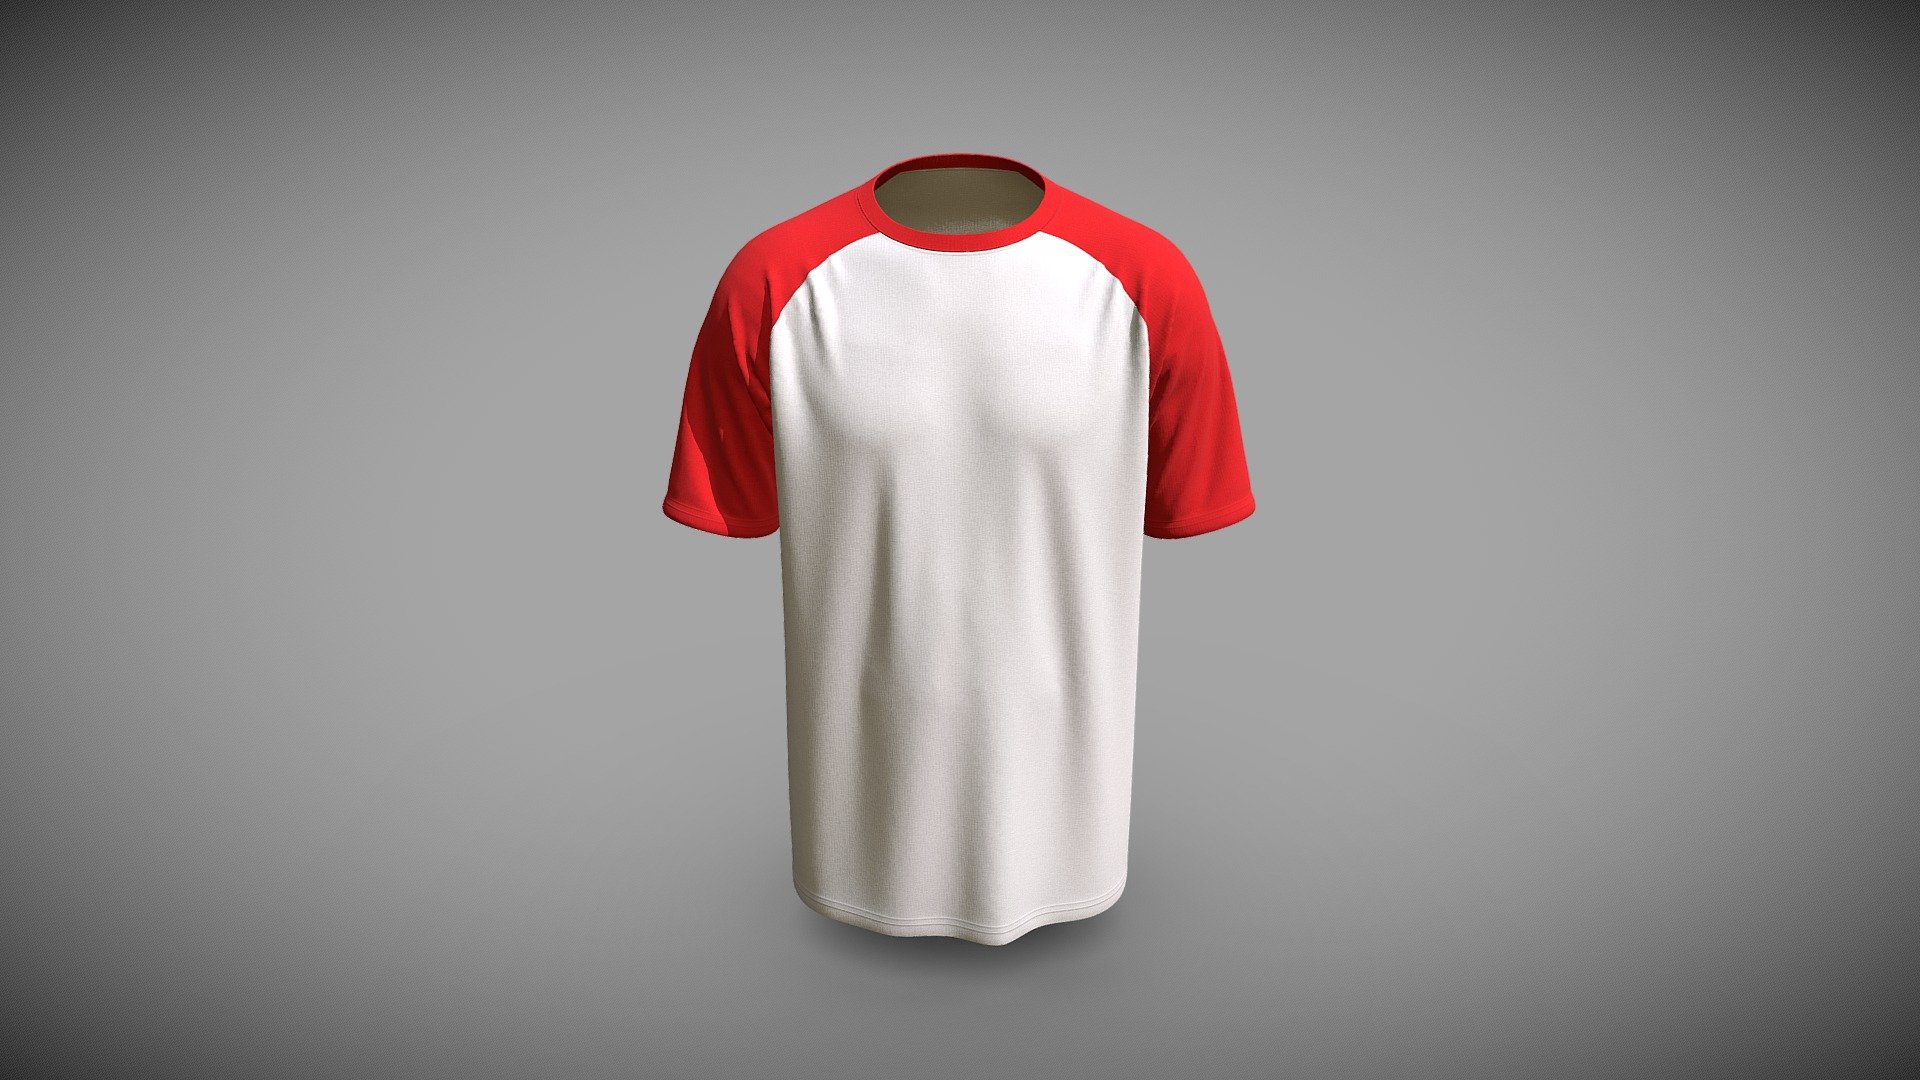 Cloth Title = Sports Raglan Short Sleeves Baseball Tee 

SKU = DG100127 

Category = Unisex 

Product Type = T-Shirt 

Cloth Length = Regular 

Body Fit = Regular Fit 

Occasion = Casual  

Sleeve Style = Raglan Sleeve 


Our Services:

3D Apparel Design.

OBJ,FBX,GLTF Making with High/Low Poly.

Fabric Digitalization.

Mockup making.

3D Teck Pack.

Pattern Making.

2D Illustration.

Cloth Animation and 360 Spin Video.


Contact us:- 

Email: info@digitalfashionwear.com 

Website: https://digitalfashionwear.com 


We designed all the types of cloth specially focused on product visualization, e-commerce, fitting, and production. 

We will design: 

T-shirts 

Polo shirts 

Hoodies 

Sweatshirt 

Jackets 

Shirts 

TankTops 

Trousers 

Bras 

Underwear 

Blazer 

Aprons 

Leggings 

and All Fashion items. 





Our goal is to make sure what we provide you, meets your demand 3d model